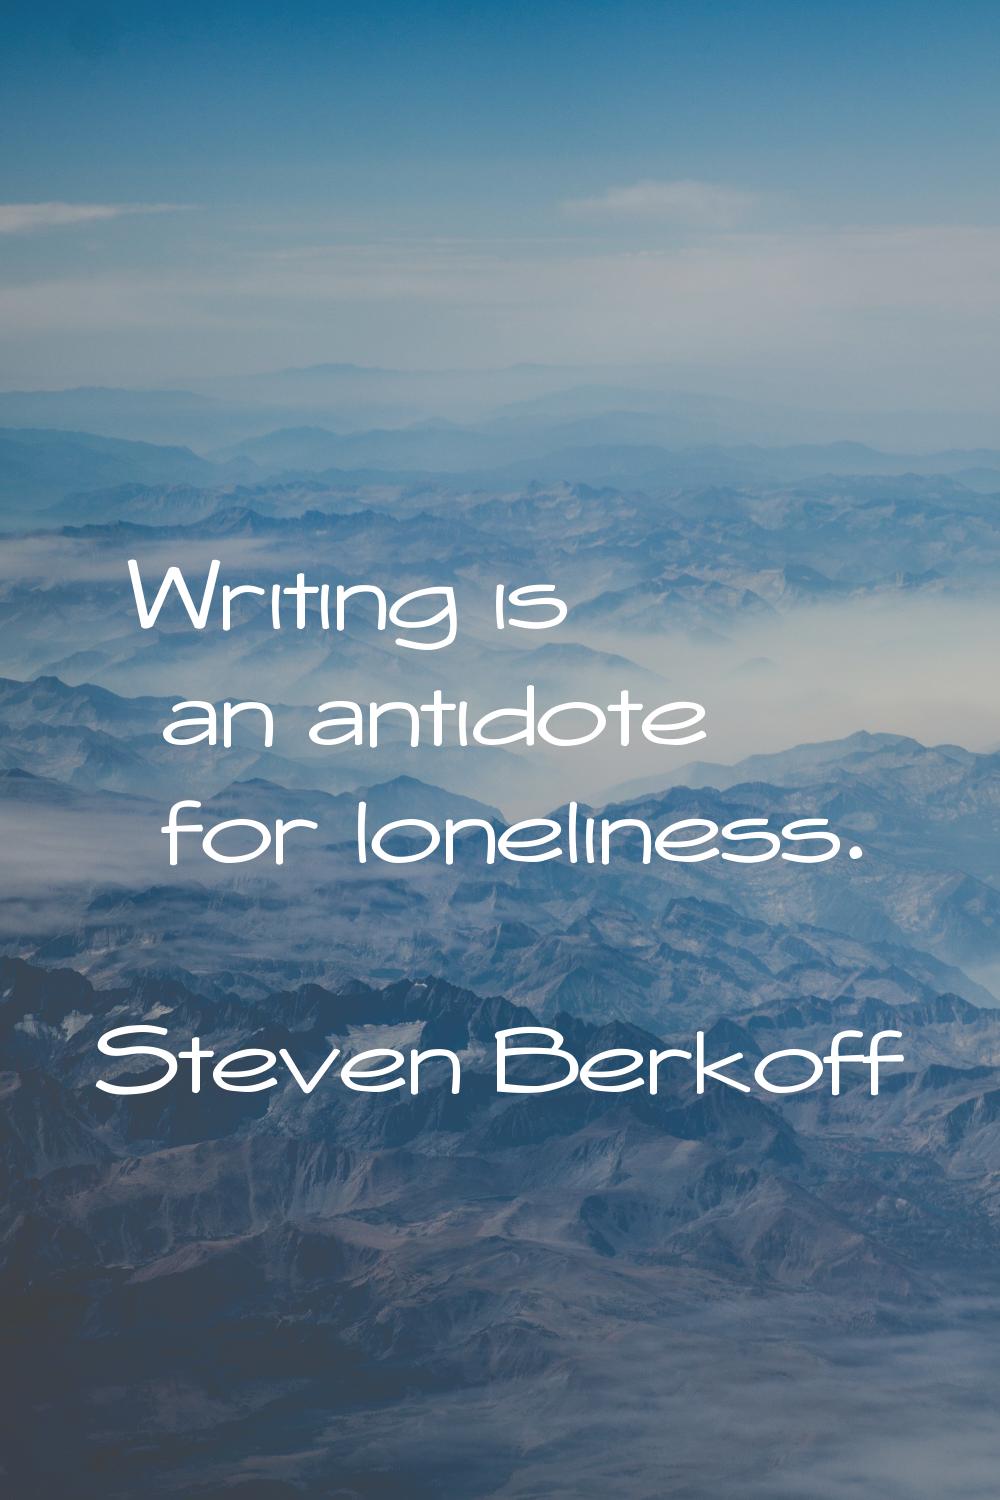 Writing is an antidote for loneliness.